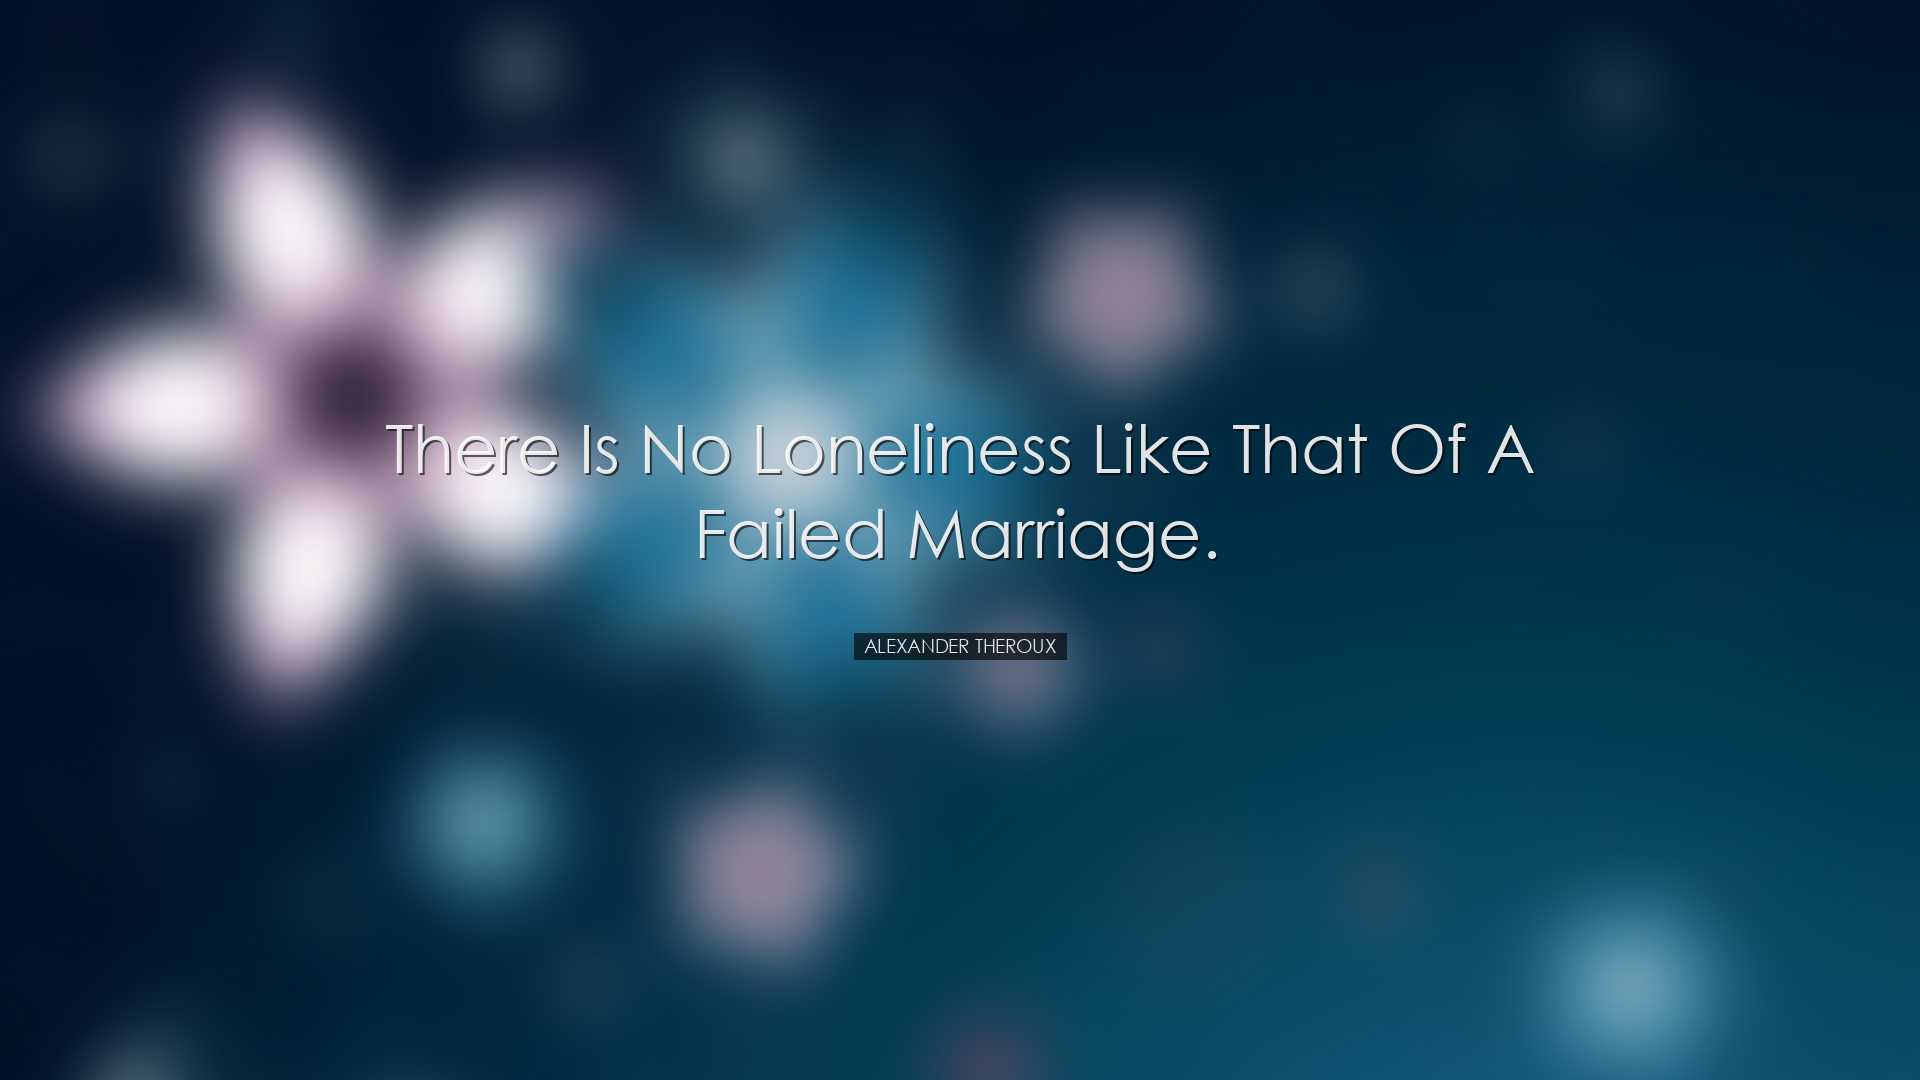 There is no loneliness like that of a failed marriage. - Alexander